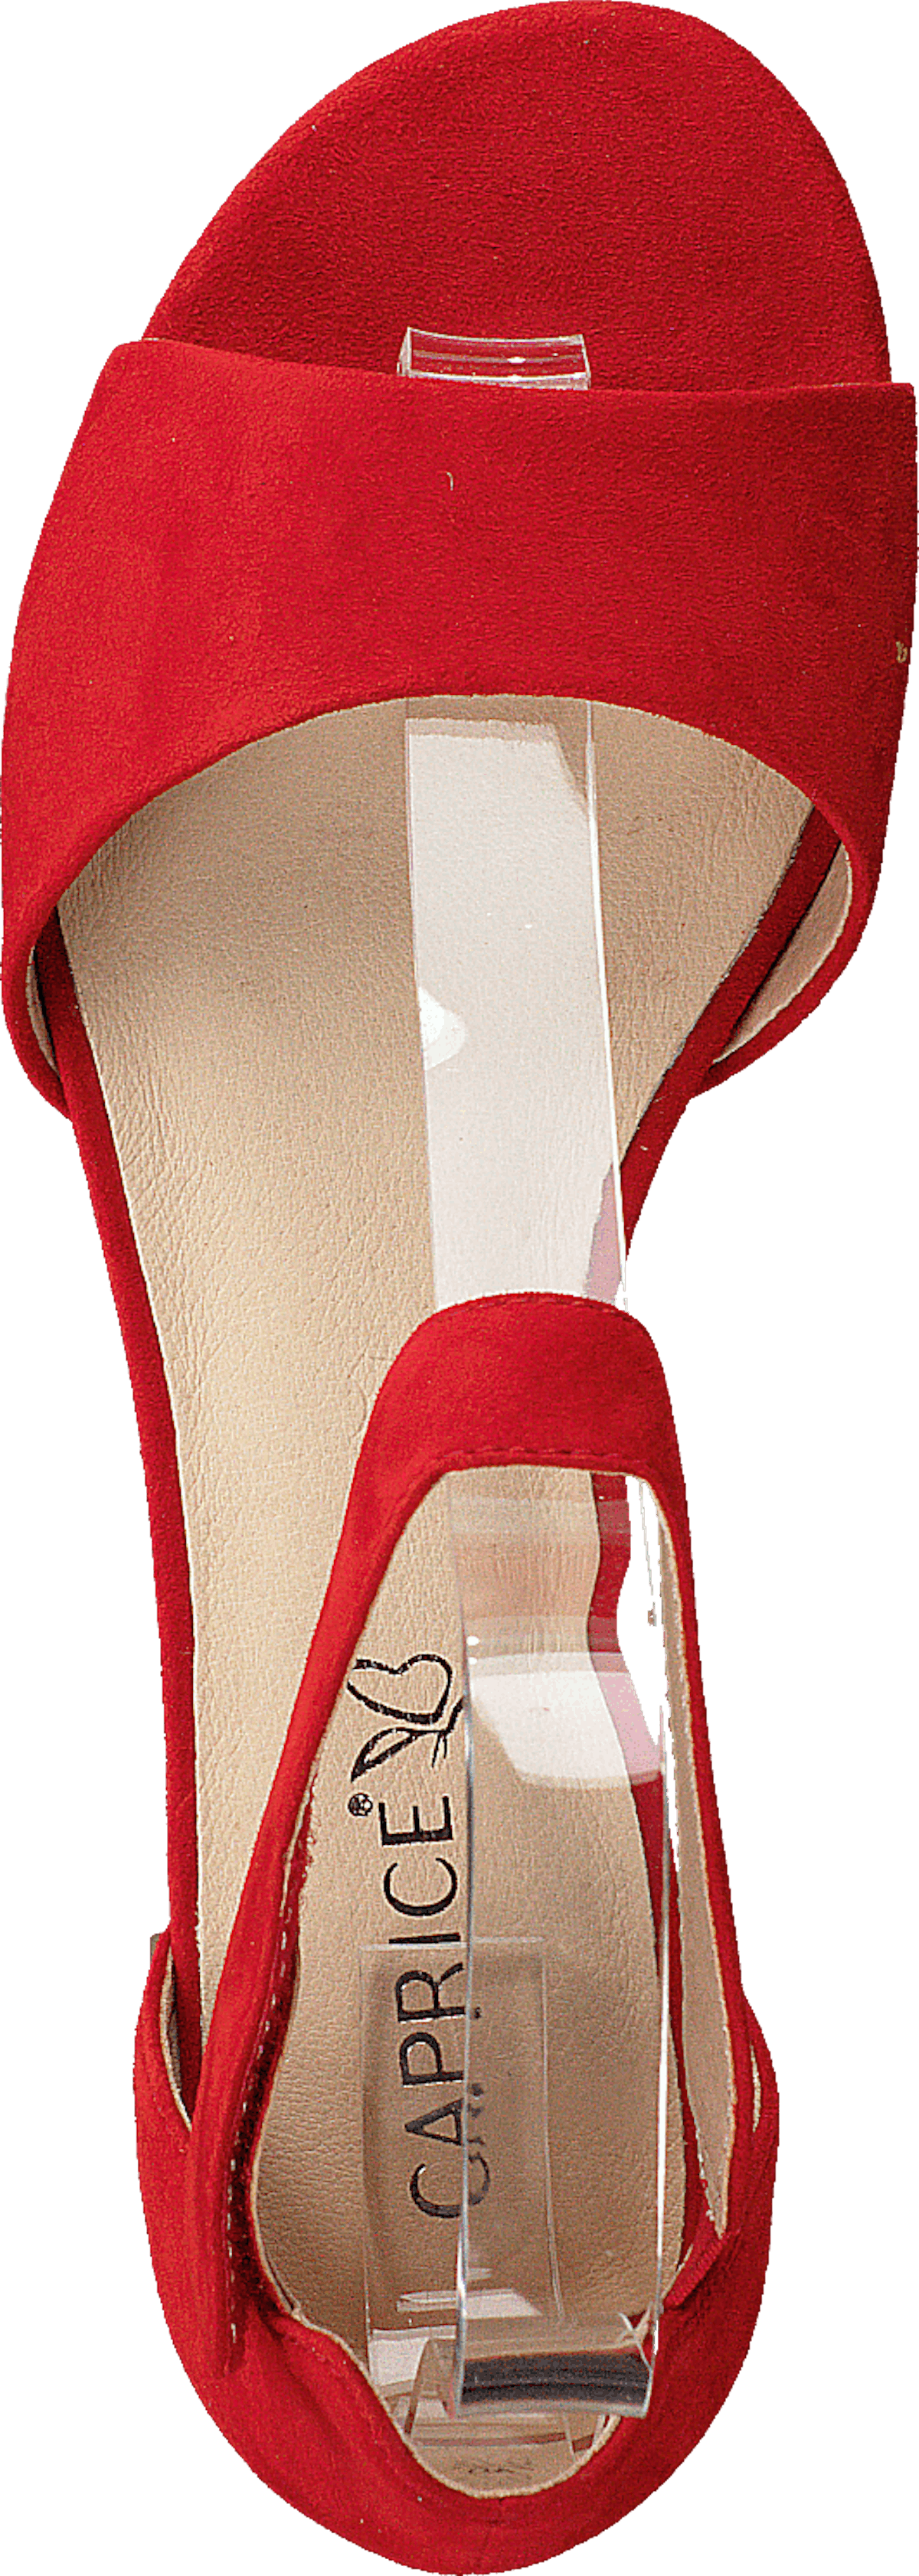 Carla Red Suede